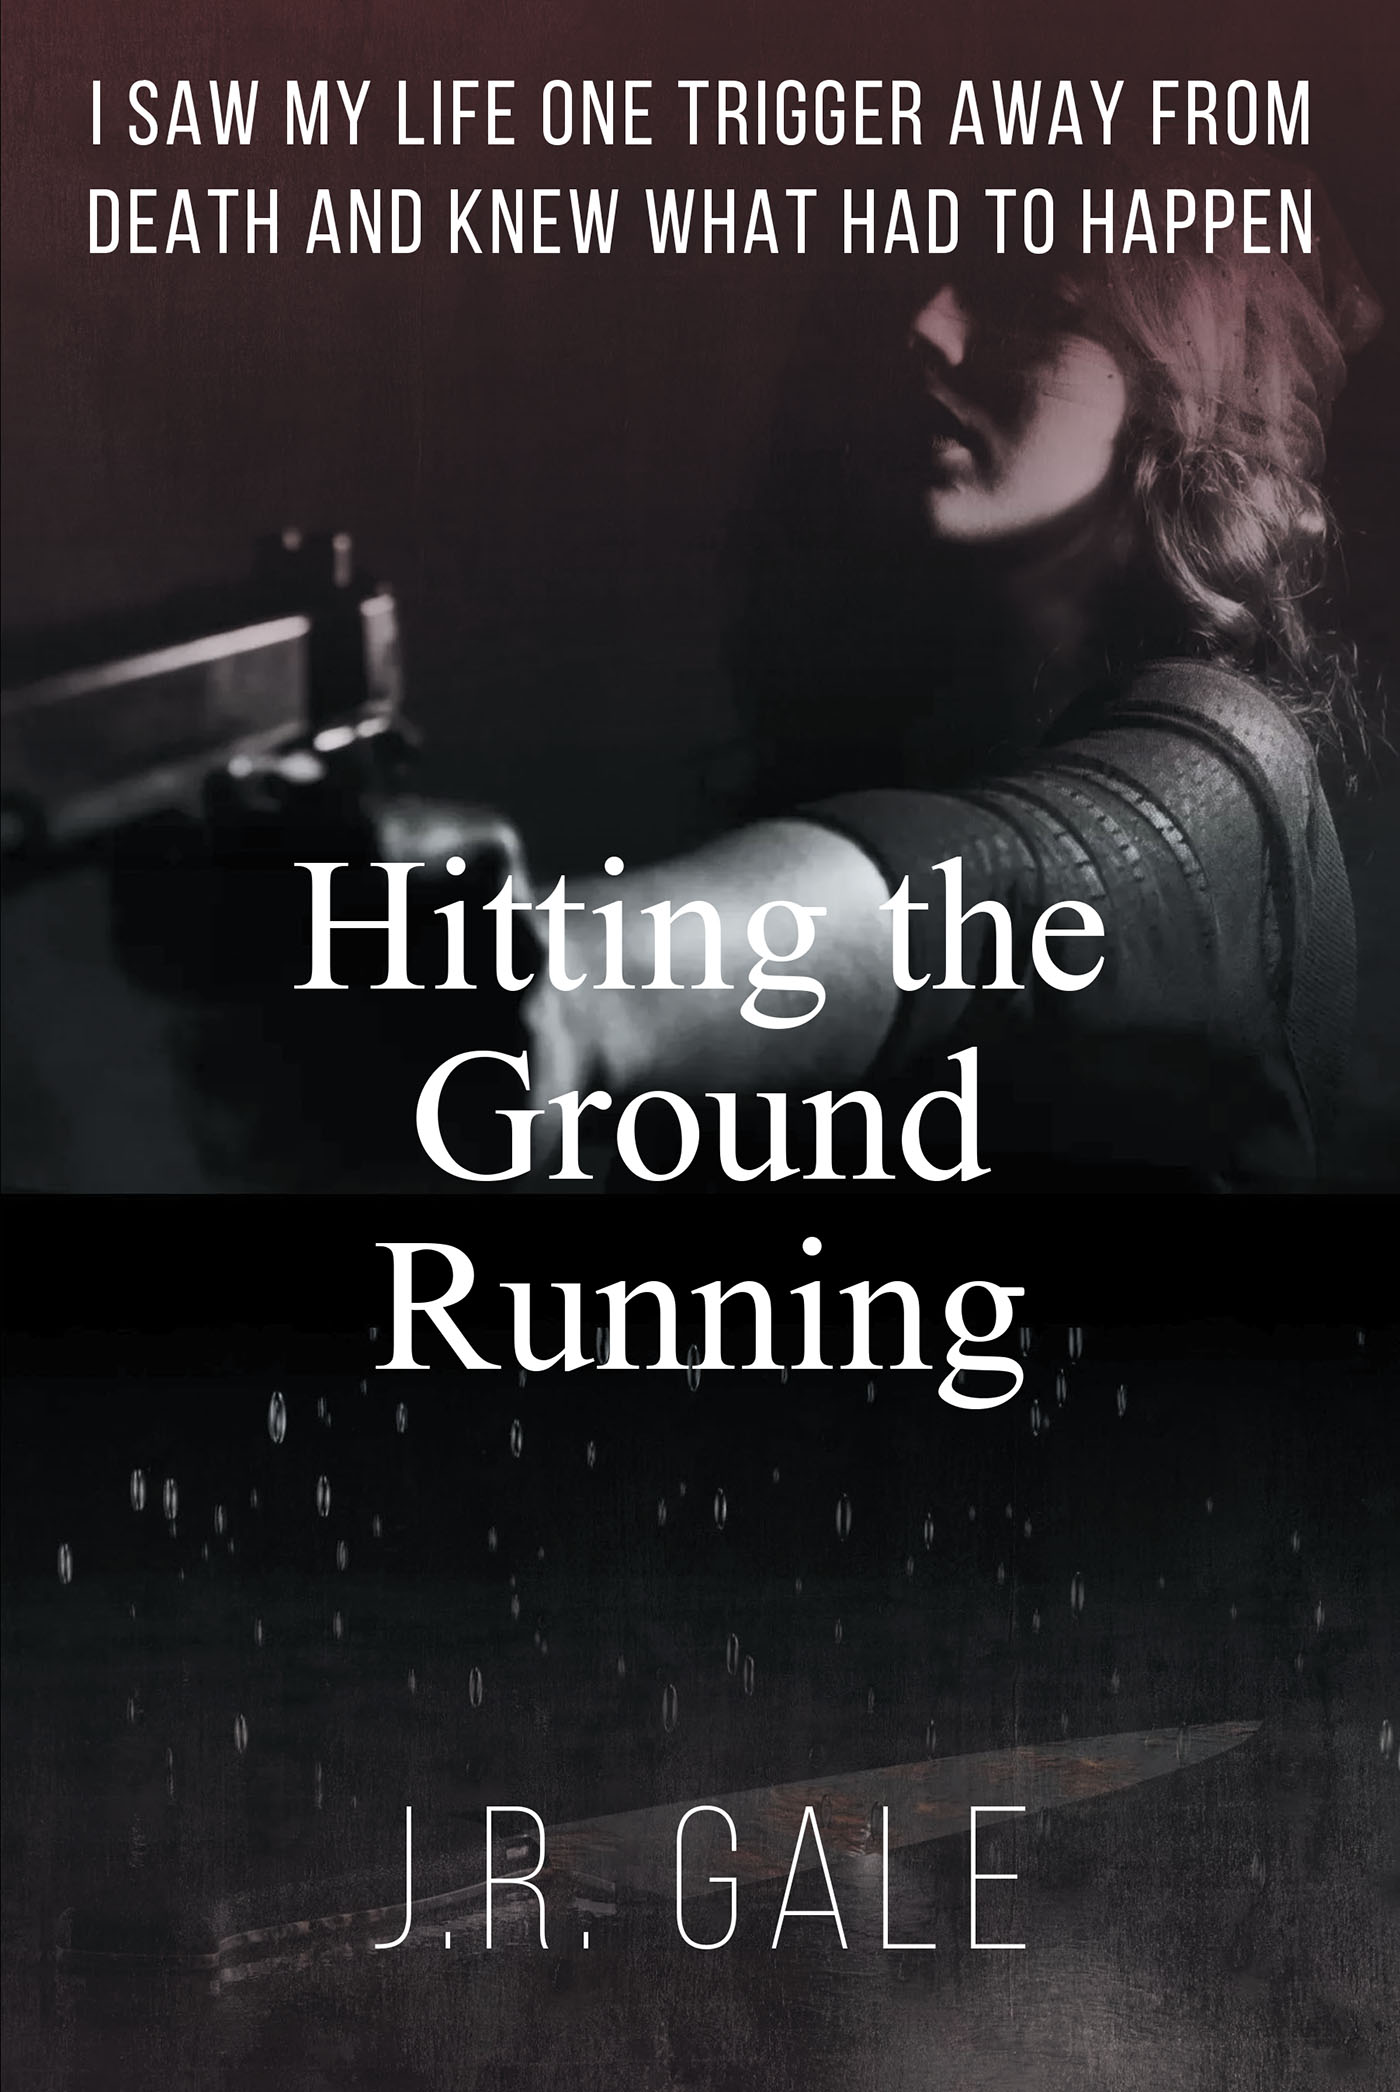 J. R. Gale’s New Book, "Hitting the Ground Running," Centers Around a High School Quarterback’s Quest to Save the Girl He Loves After She’s Kidnapped